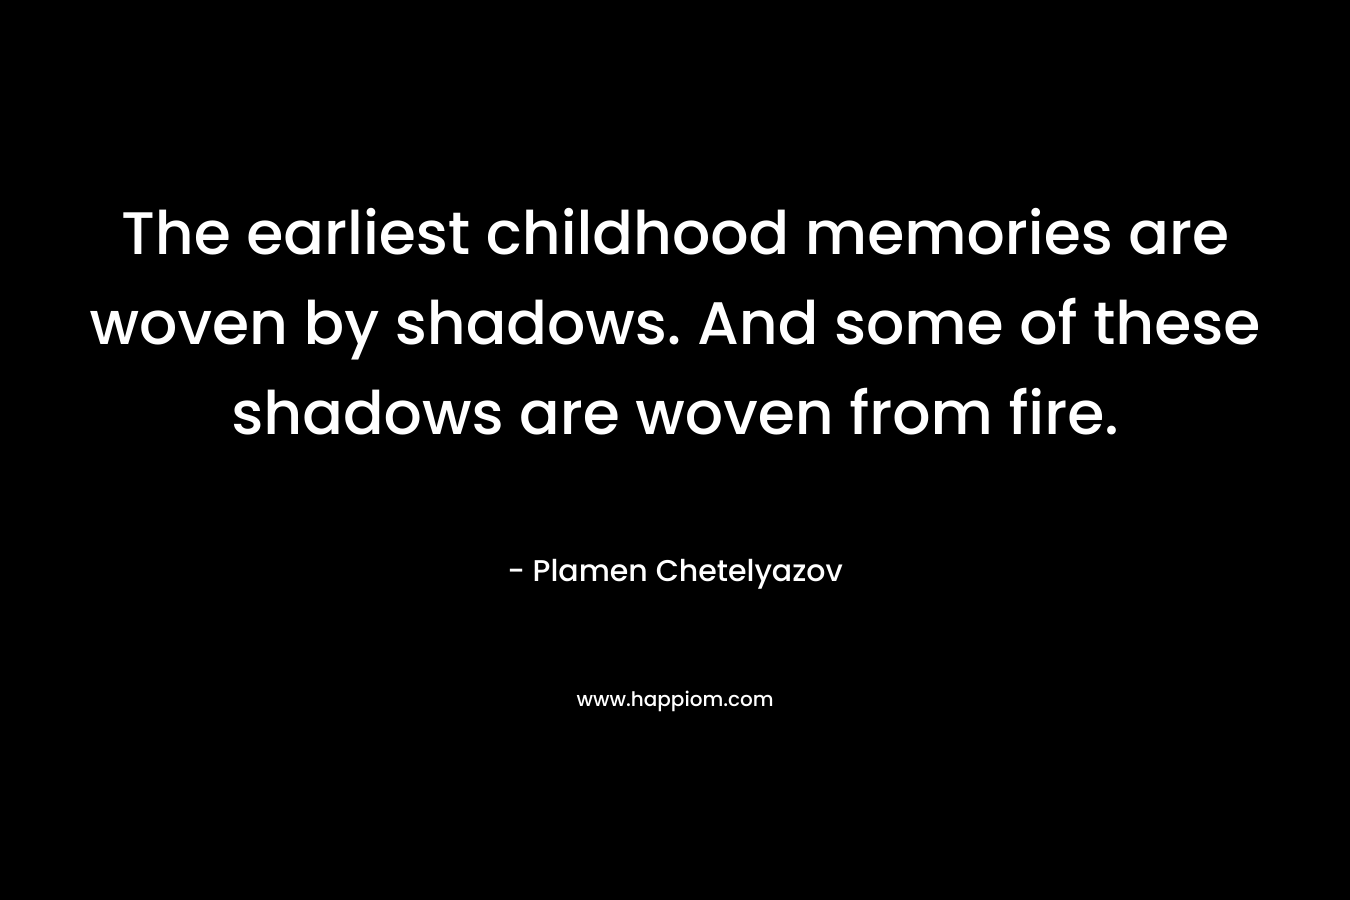 The earliest childhood memories are woven by shadows. And some of these shadows are woven from fire.